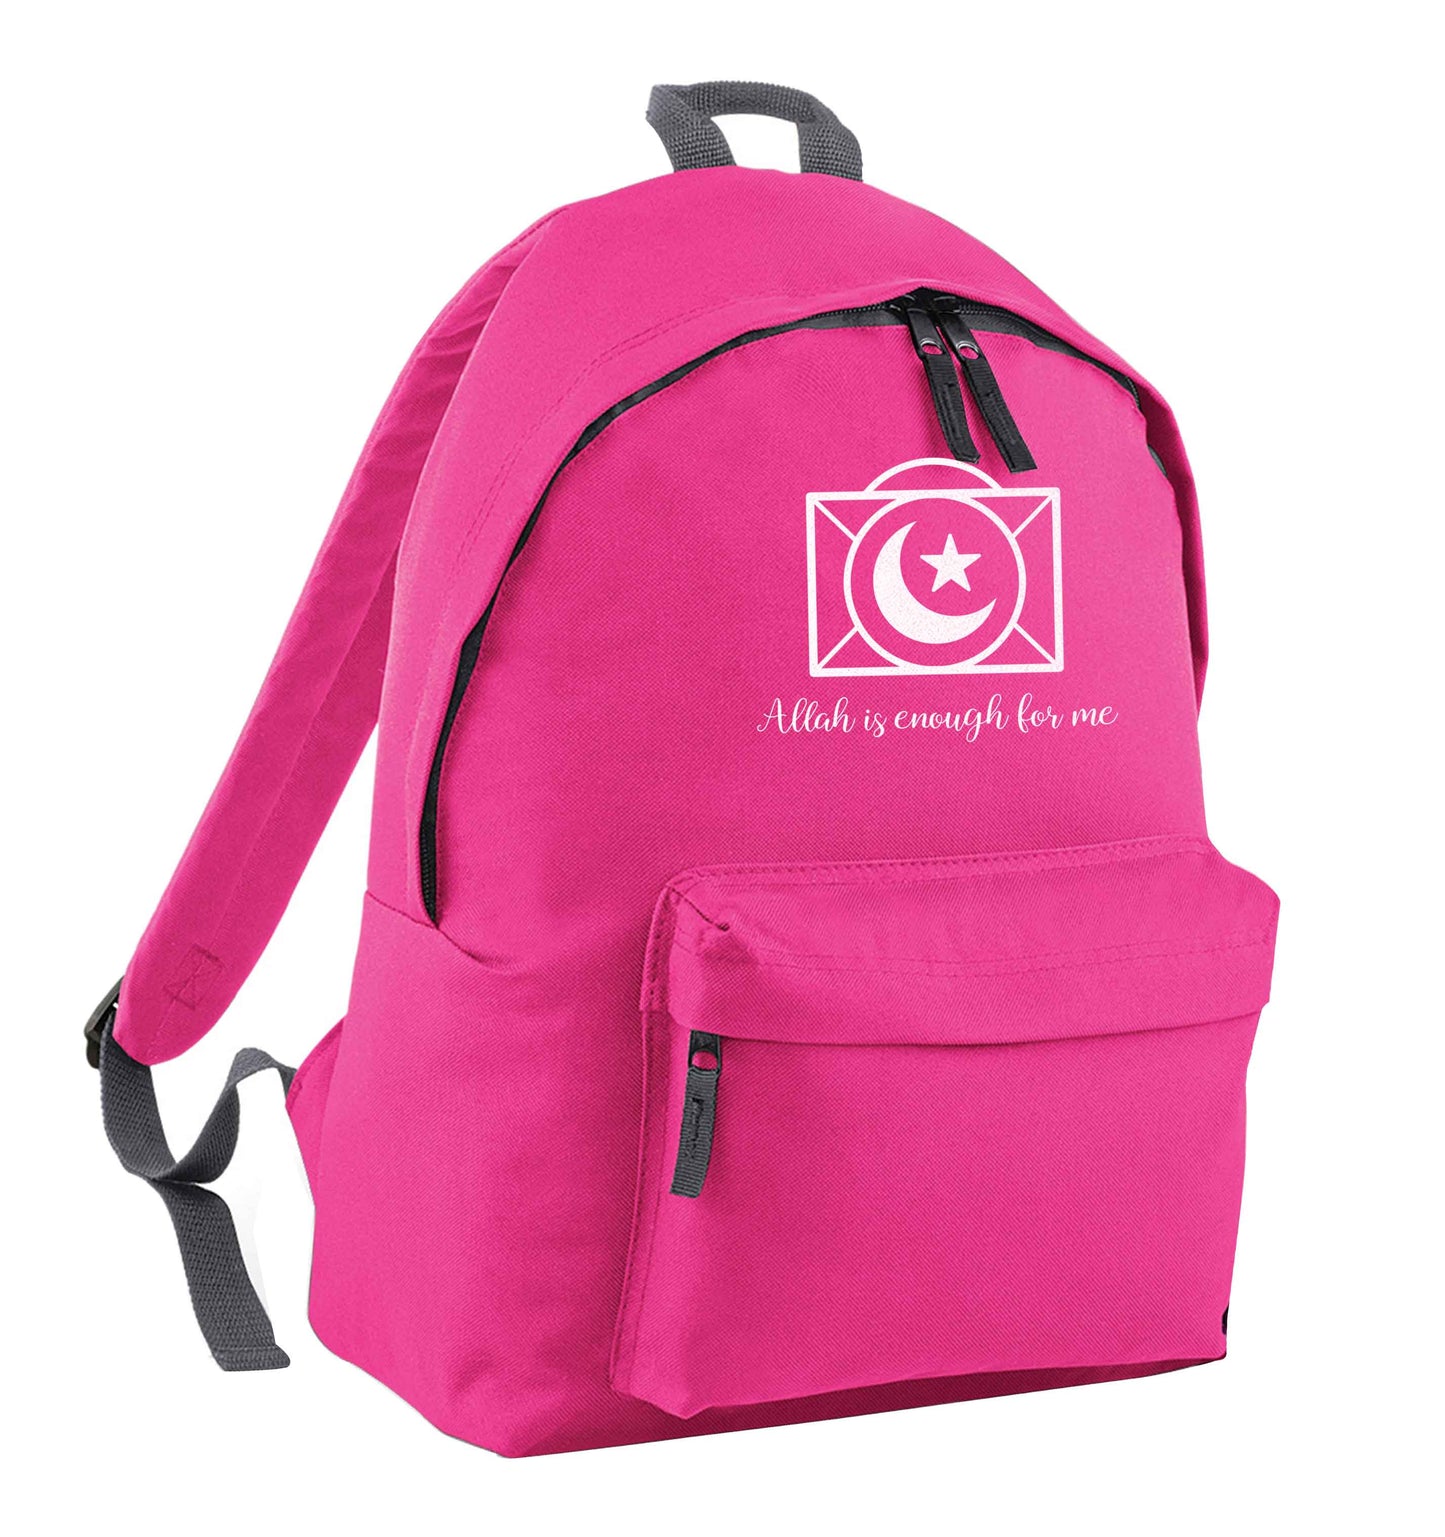 Allah is enough for me pink children's backpack